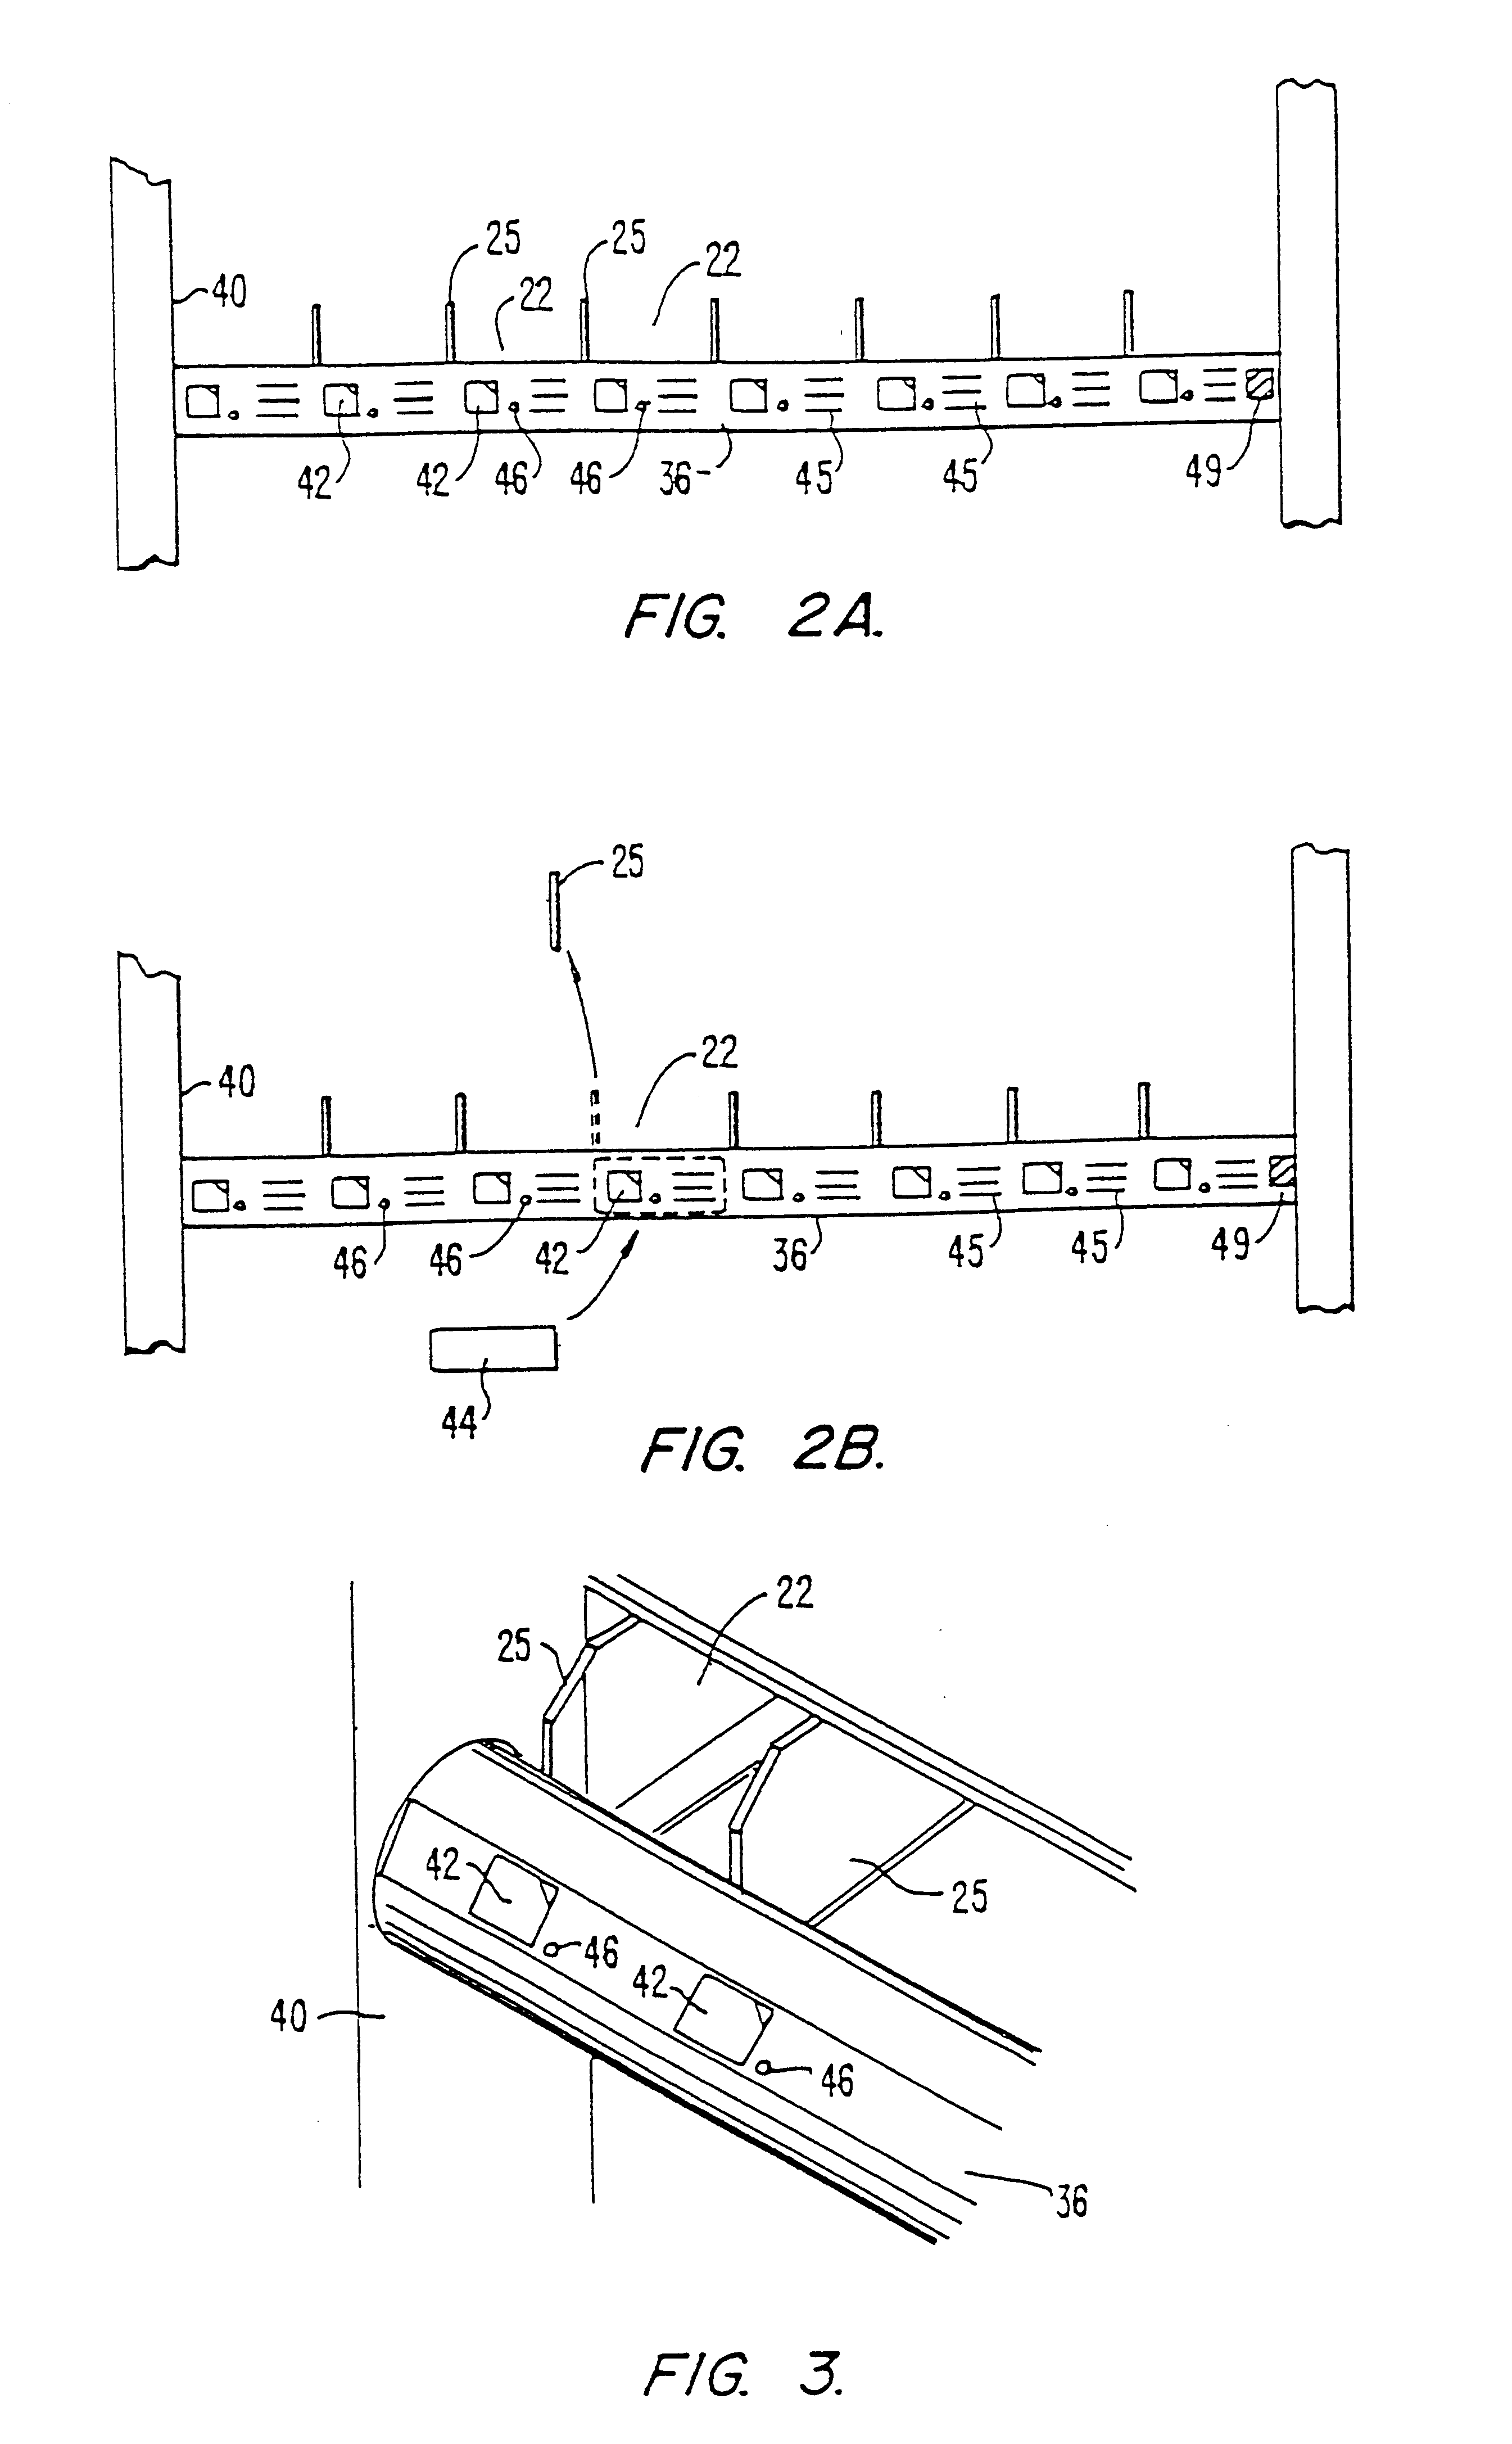 Methods and apparatus for dispensing items